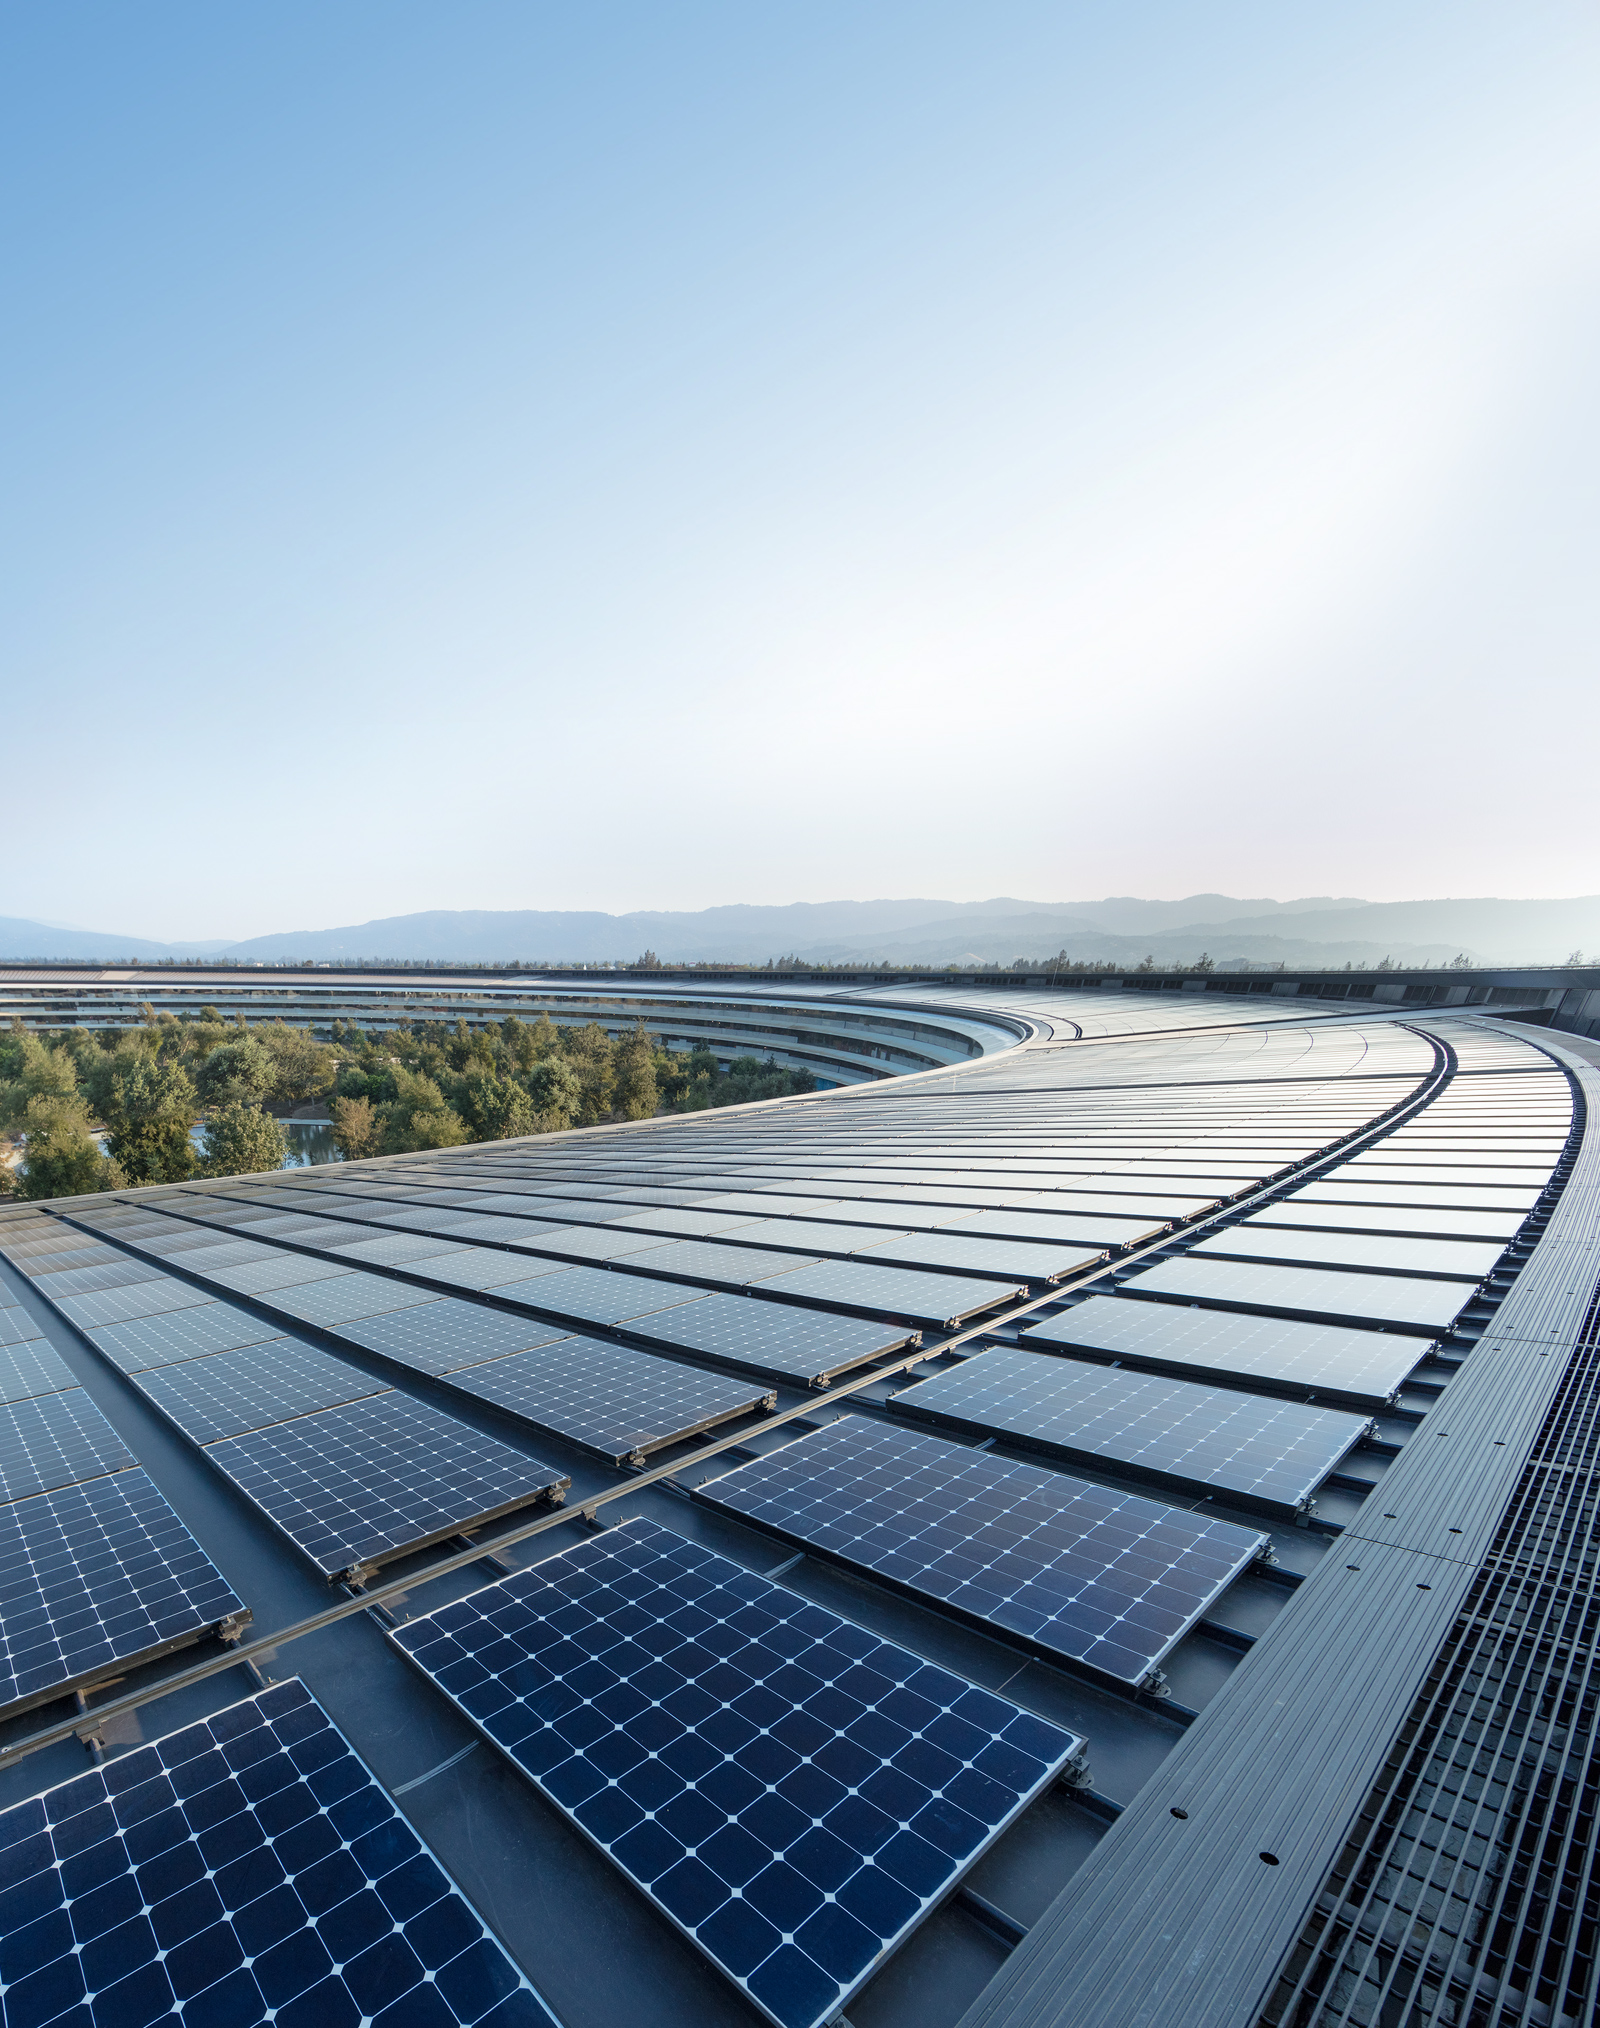 The rooftop solar installation at Apple Park helps power the building with 100 percent renewable energy.